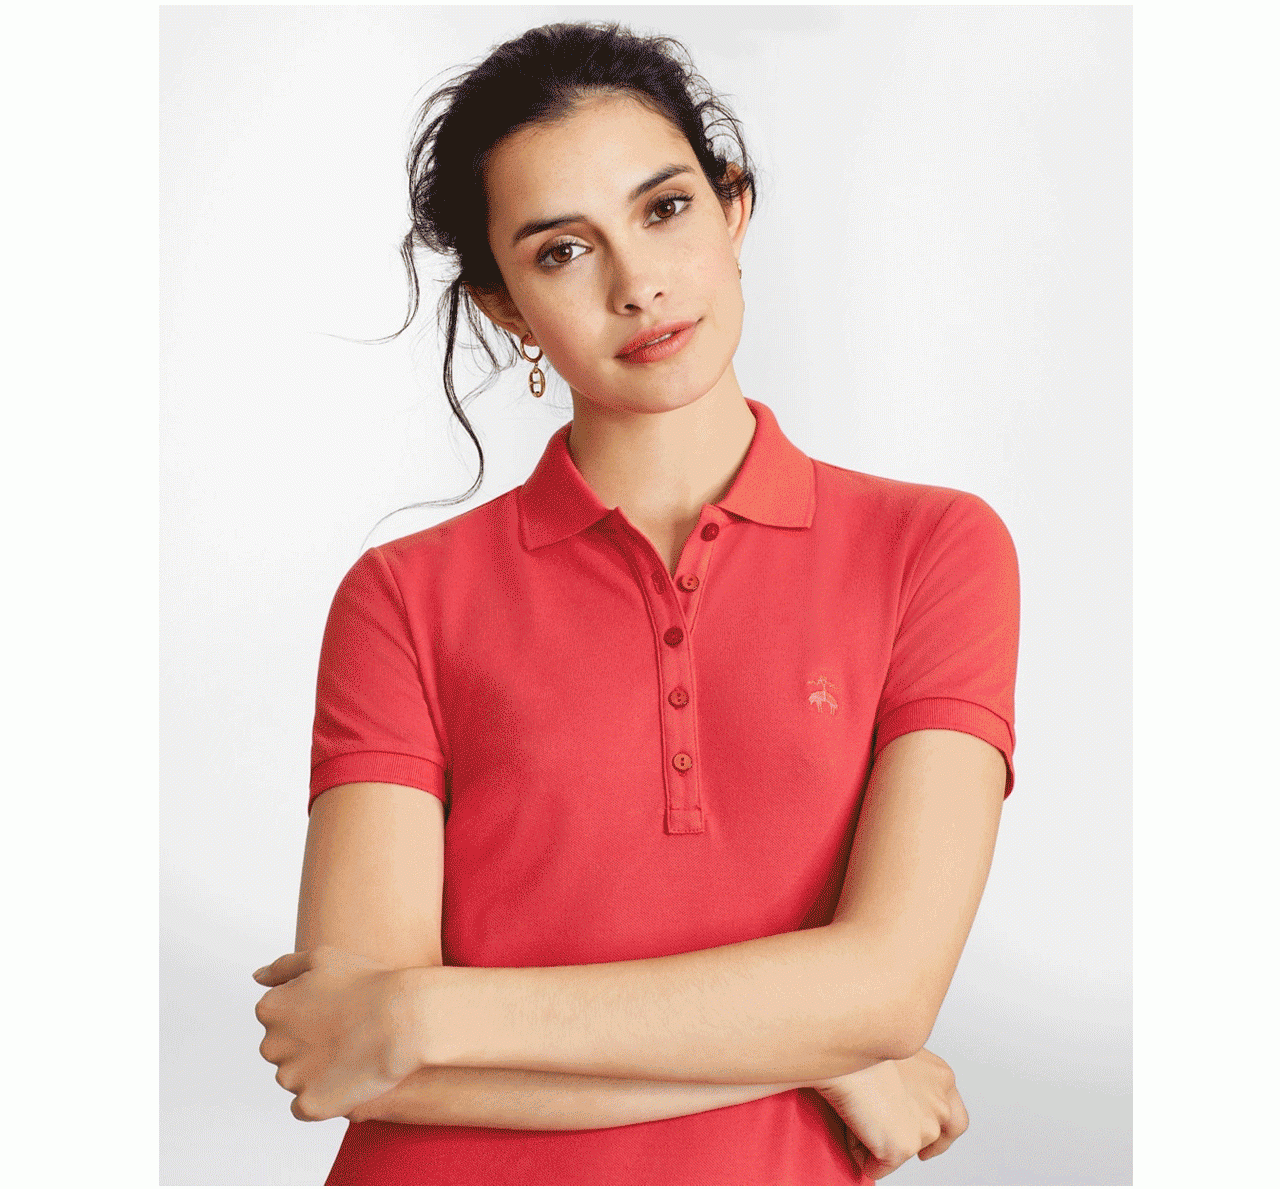 Brighten Up Add a pop of color with our favorite women's polos.